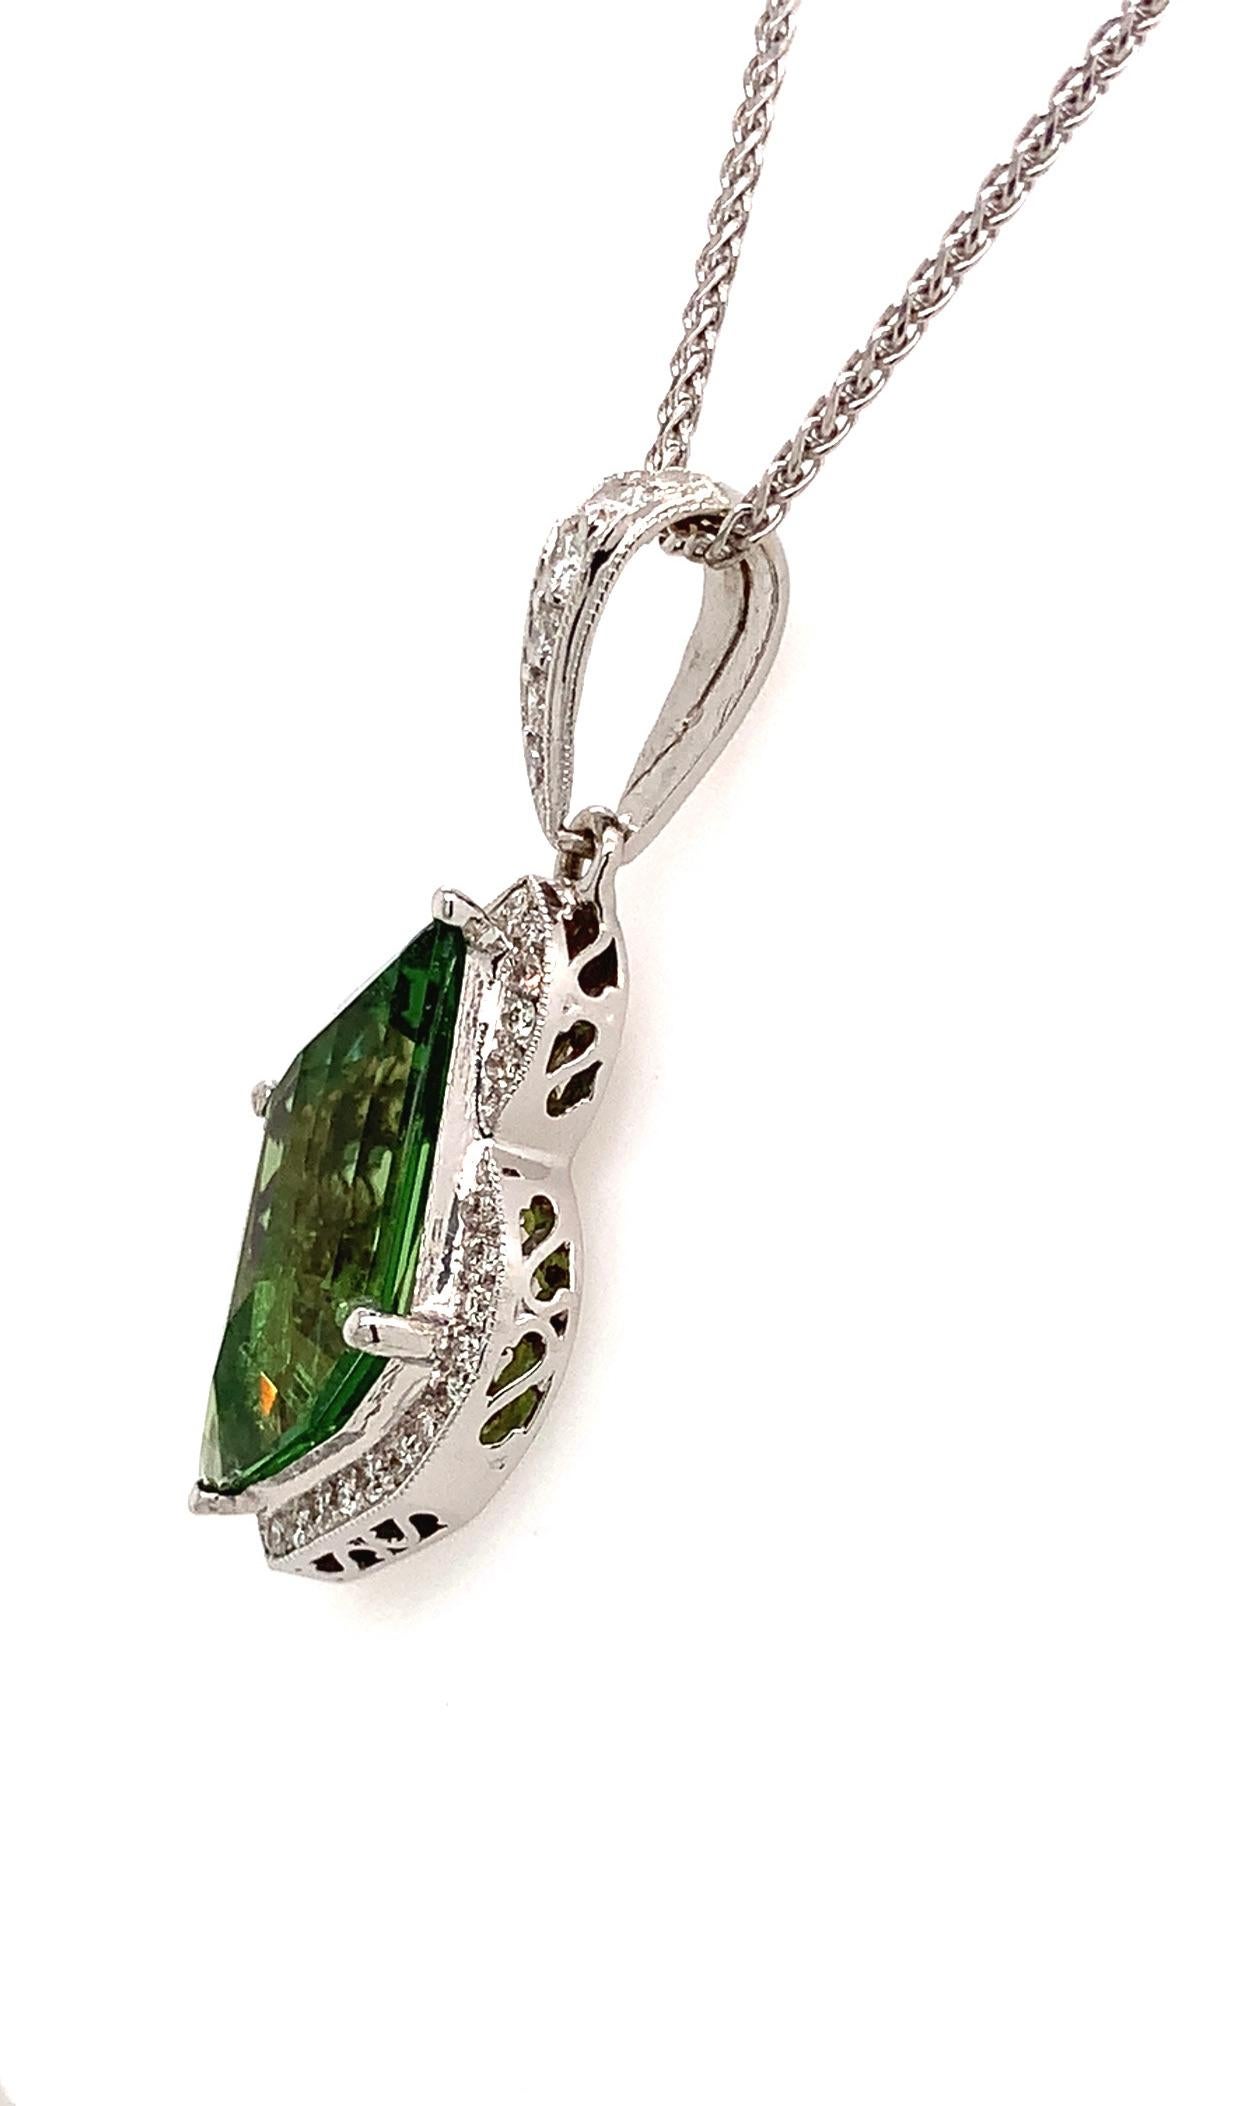 Green Garnets (Tsavorites) over 5 carats, have become very expensive. This fancy leaf cut Tsavorite is 5.50 carats, it is loupe clean and cut by Bill Vance. We had to make a custom pendant, because of the stones unusual shape. We decided to make the